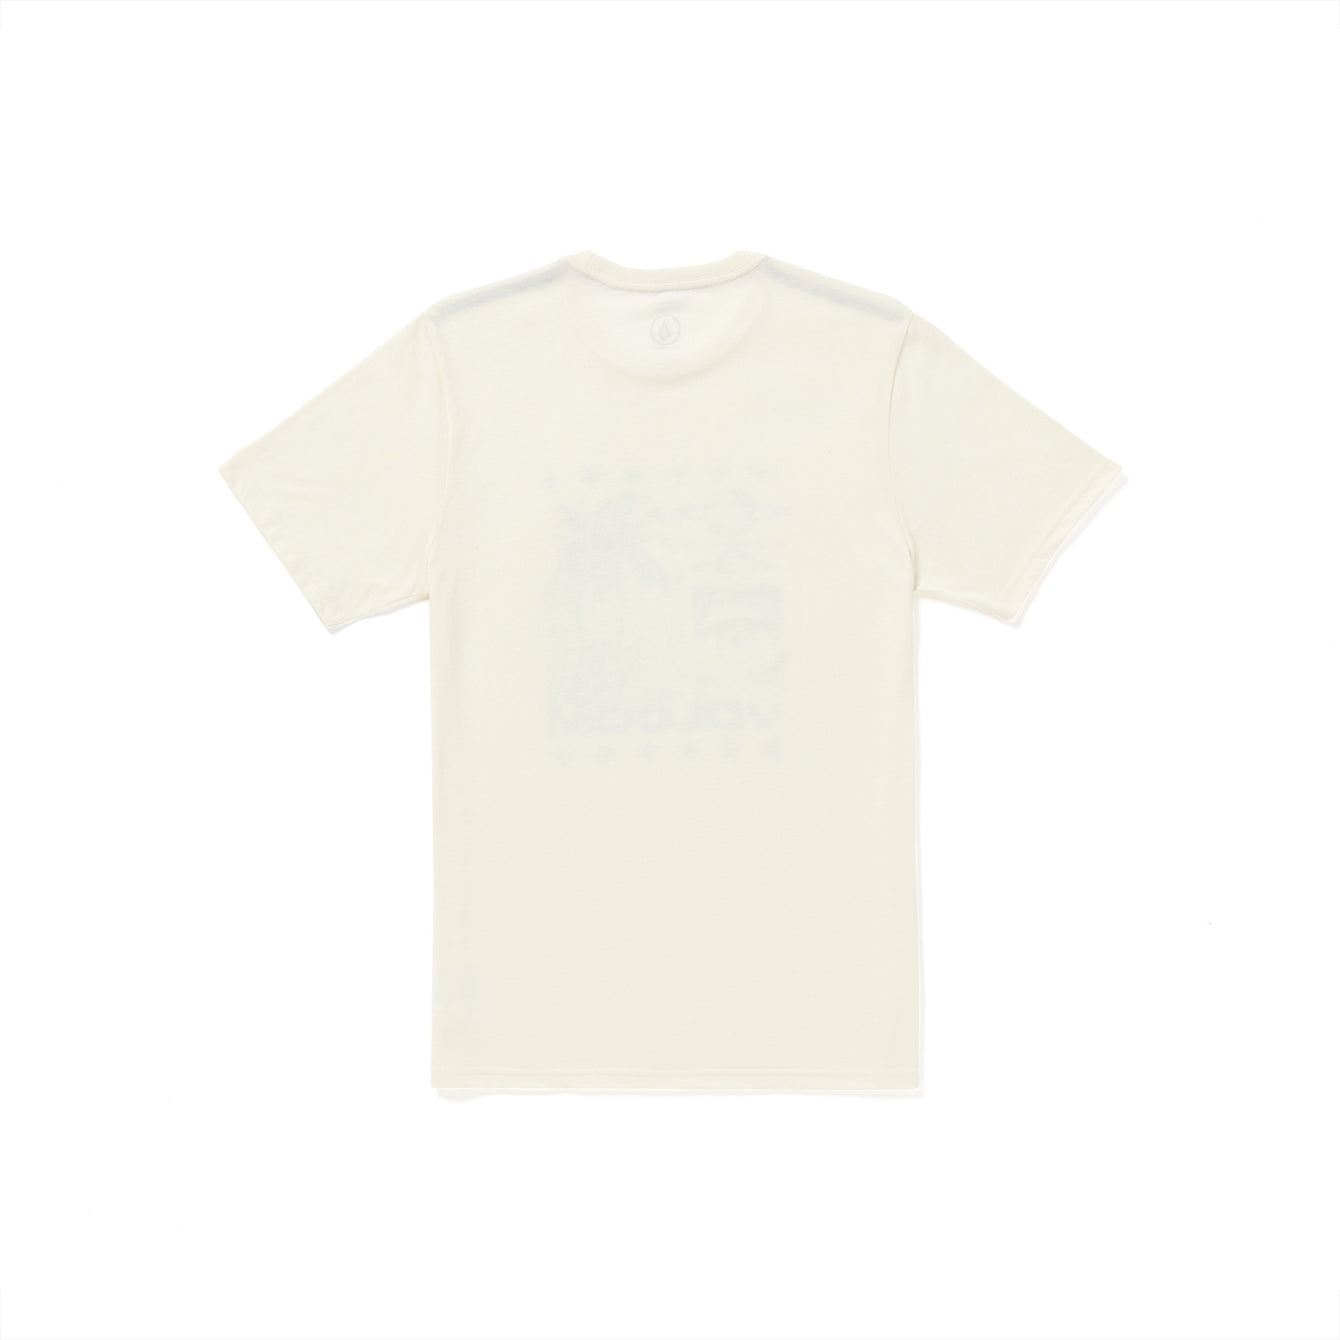 RATSO SST - OFF WHITE HEATHER